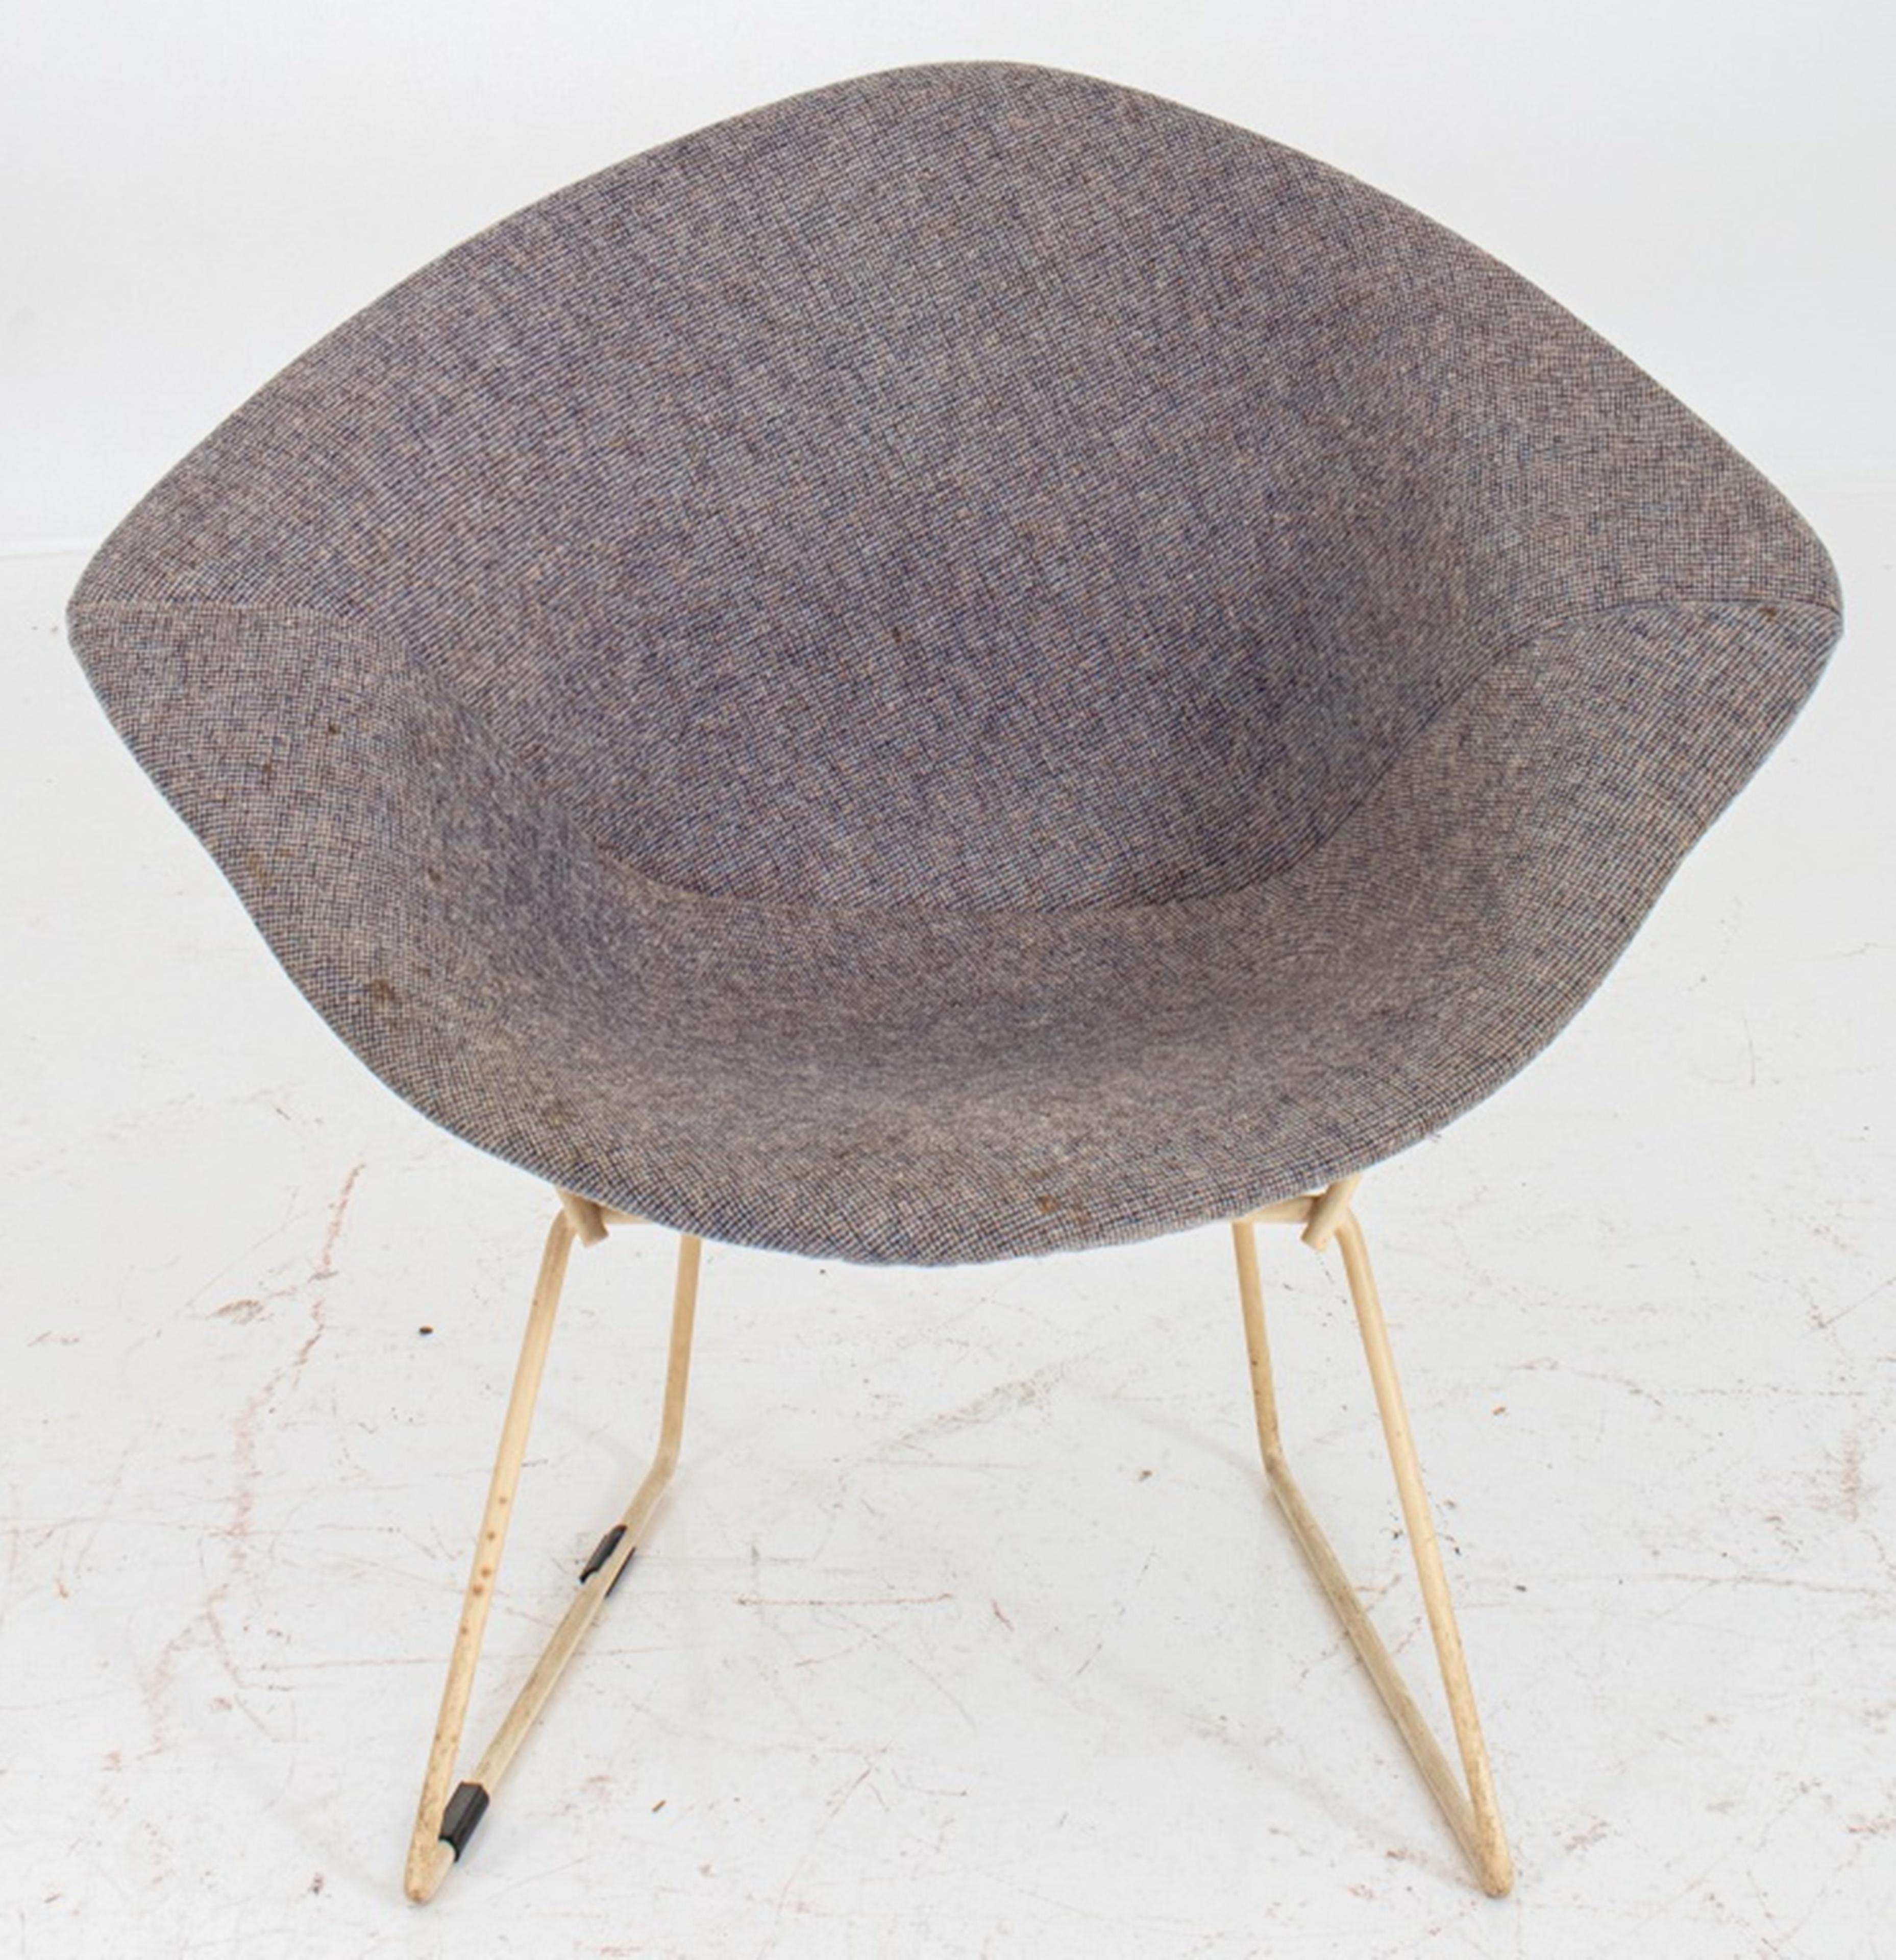 Mid-Century Modern Harry Bertoia (American, 1915 - 1978) upholstered diamond chair for Knoll (designed 1952), unmarked.
Dimensions 30